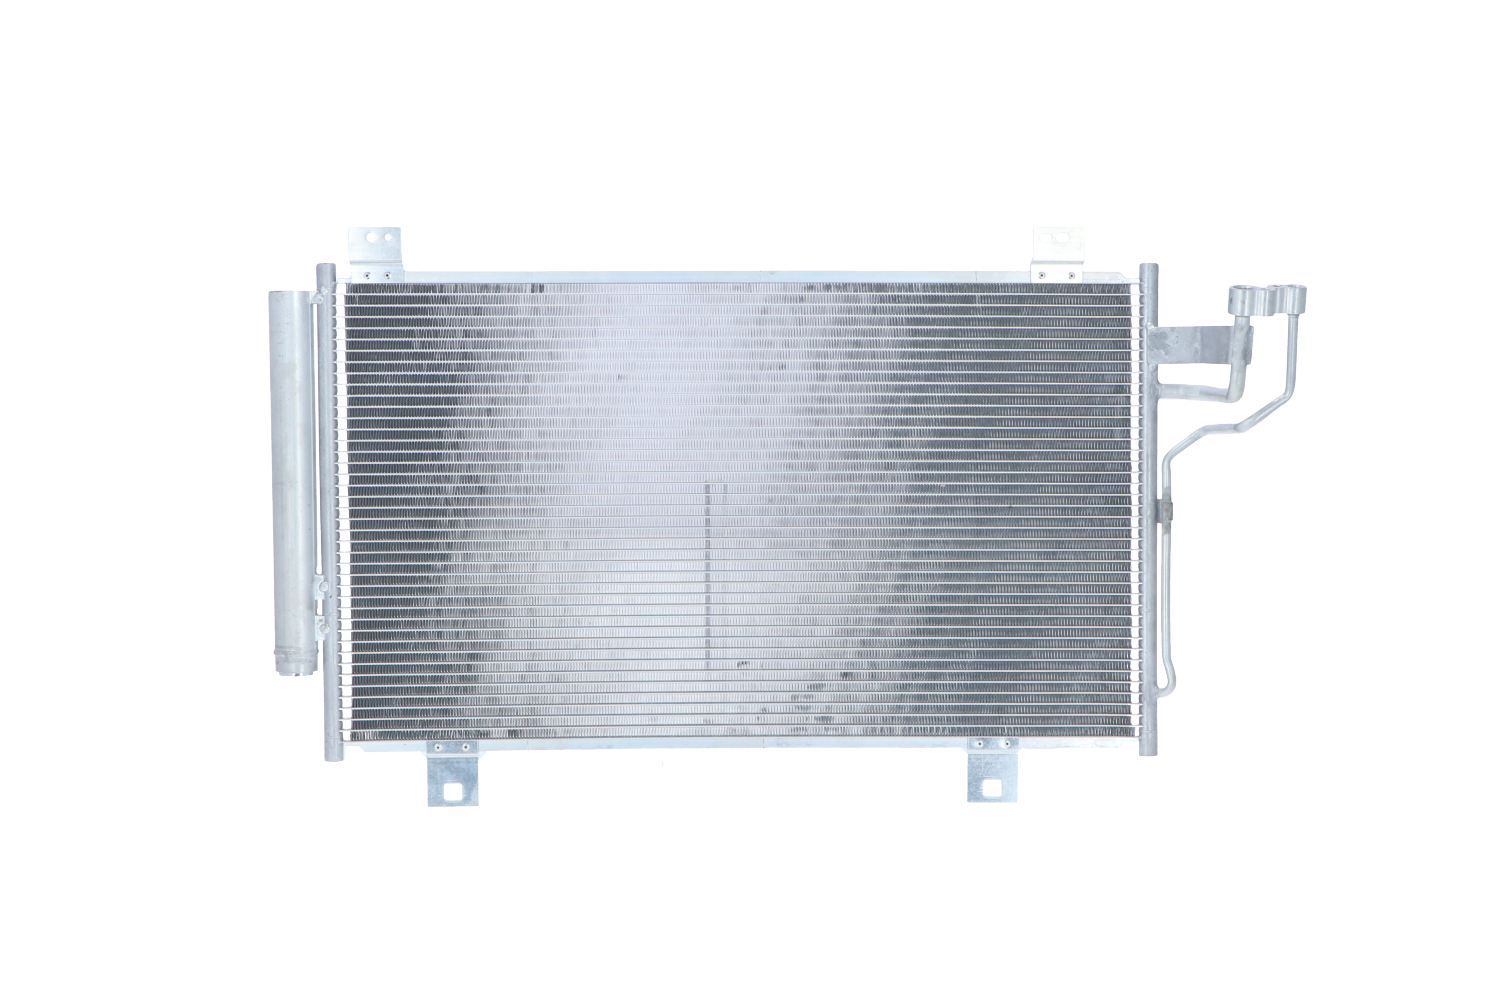 Mazda Air conditioning condenser NRF 350370 at a good price